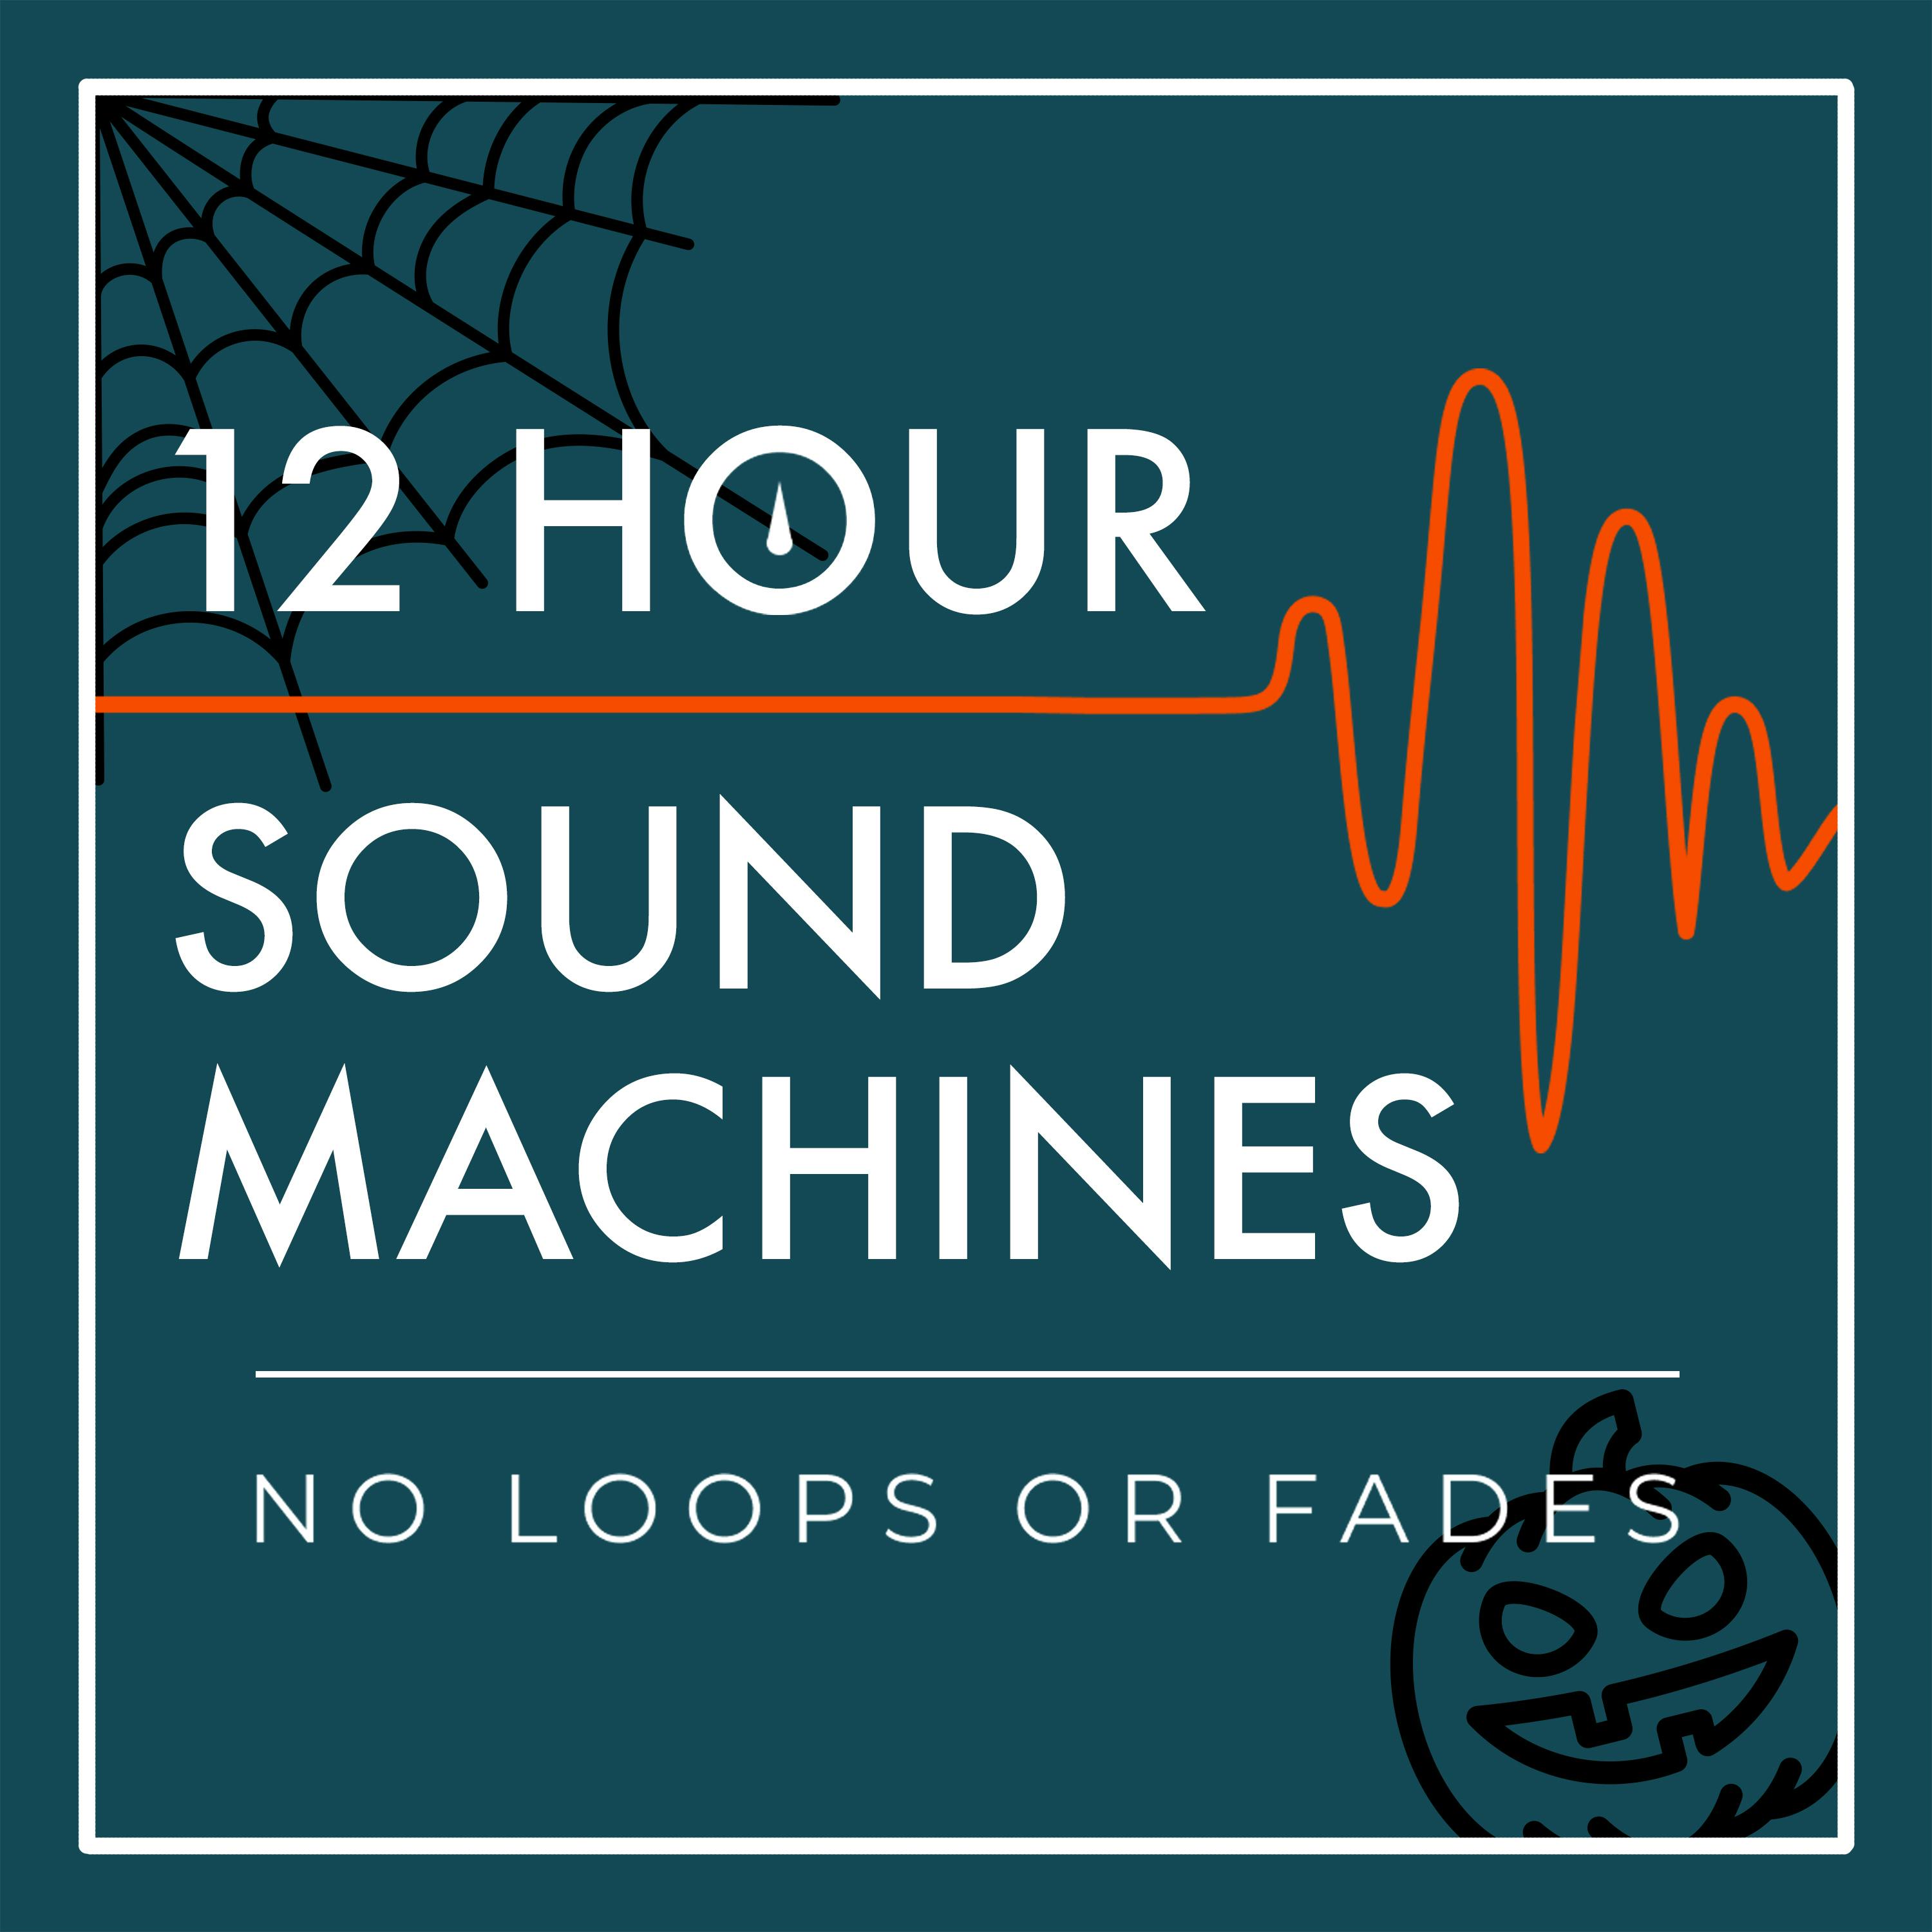 Undead Graveyard Sound Machine (12 Hours) - Spooky Soundscapes for Halloween